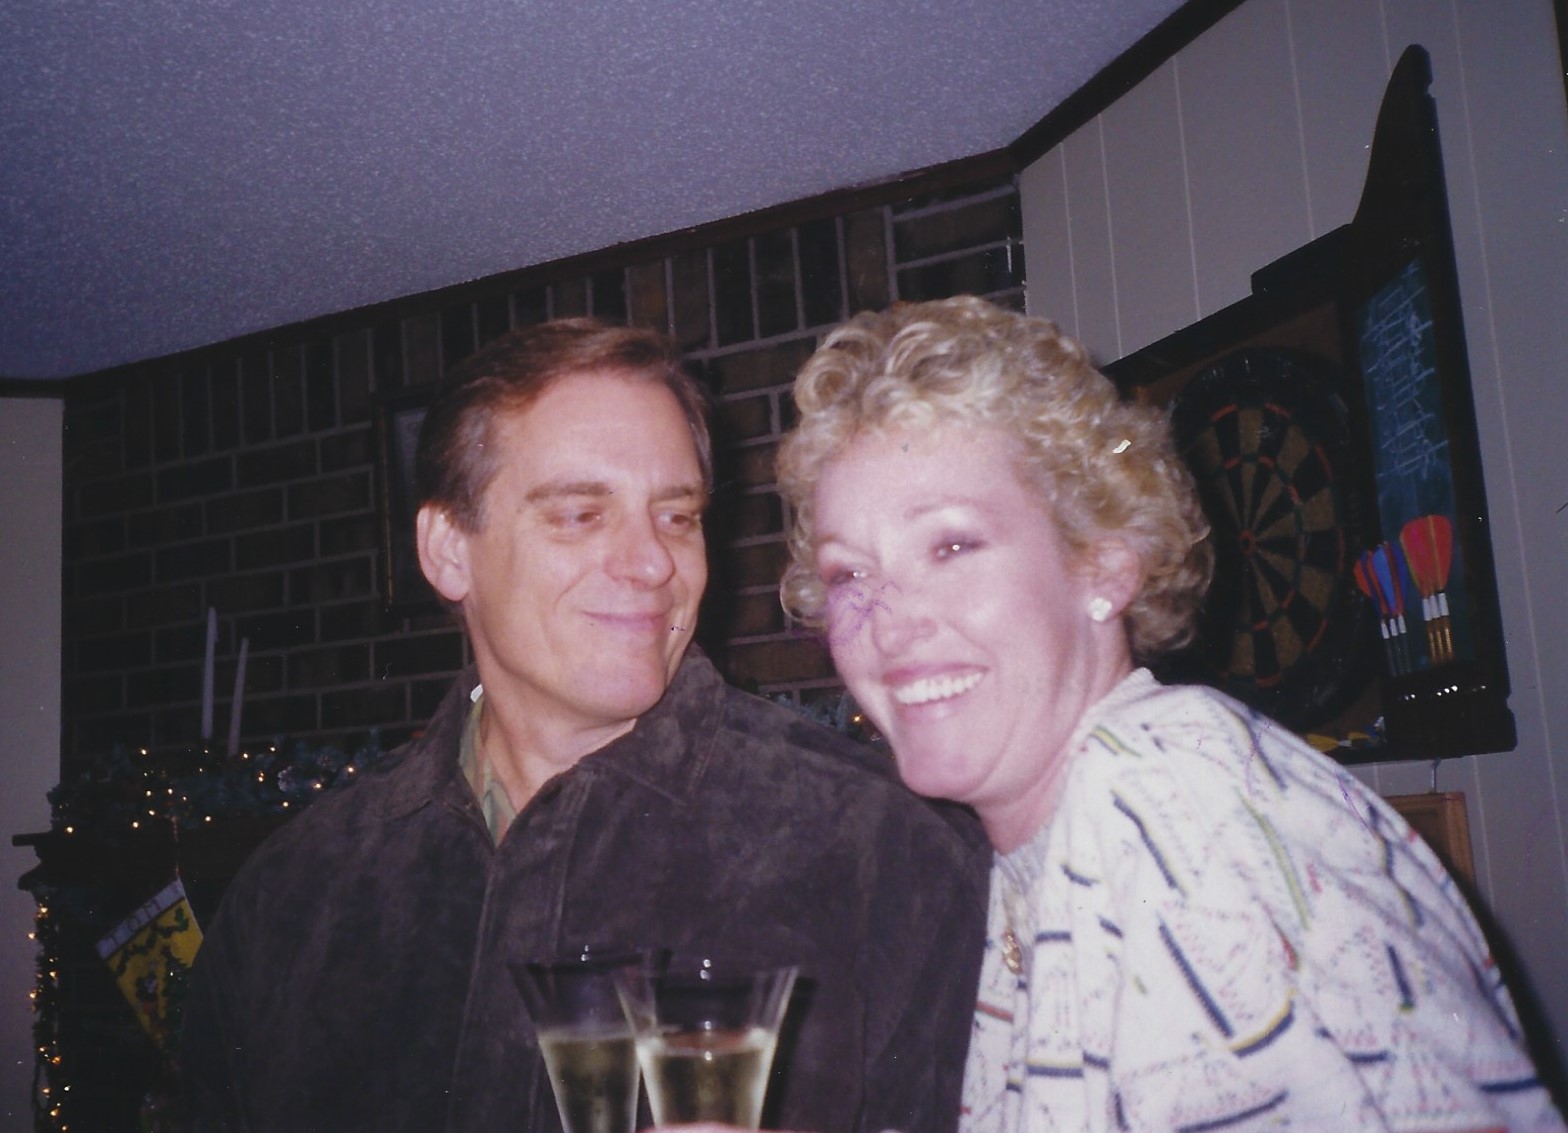 Beverley and Frank celebrating New Years Eve at the Gray's